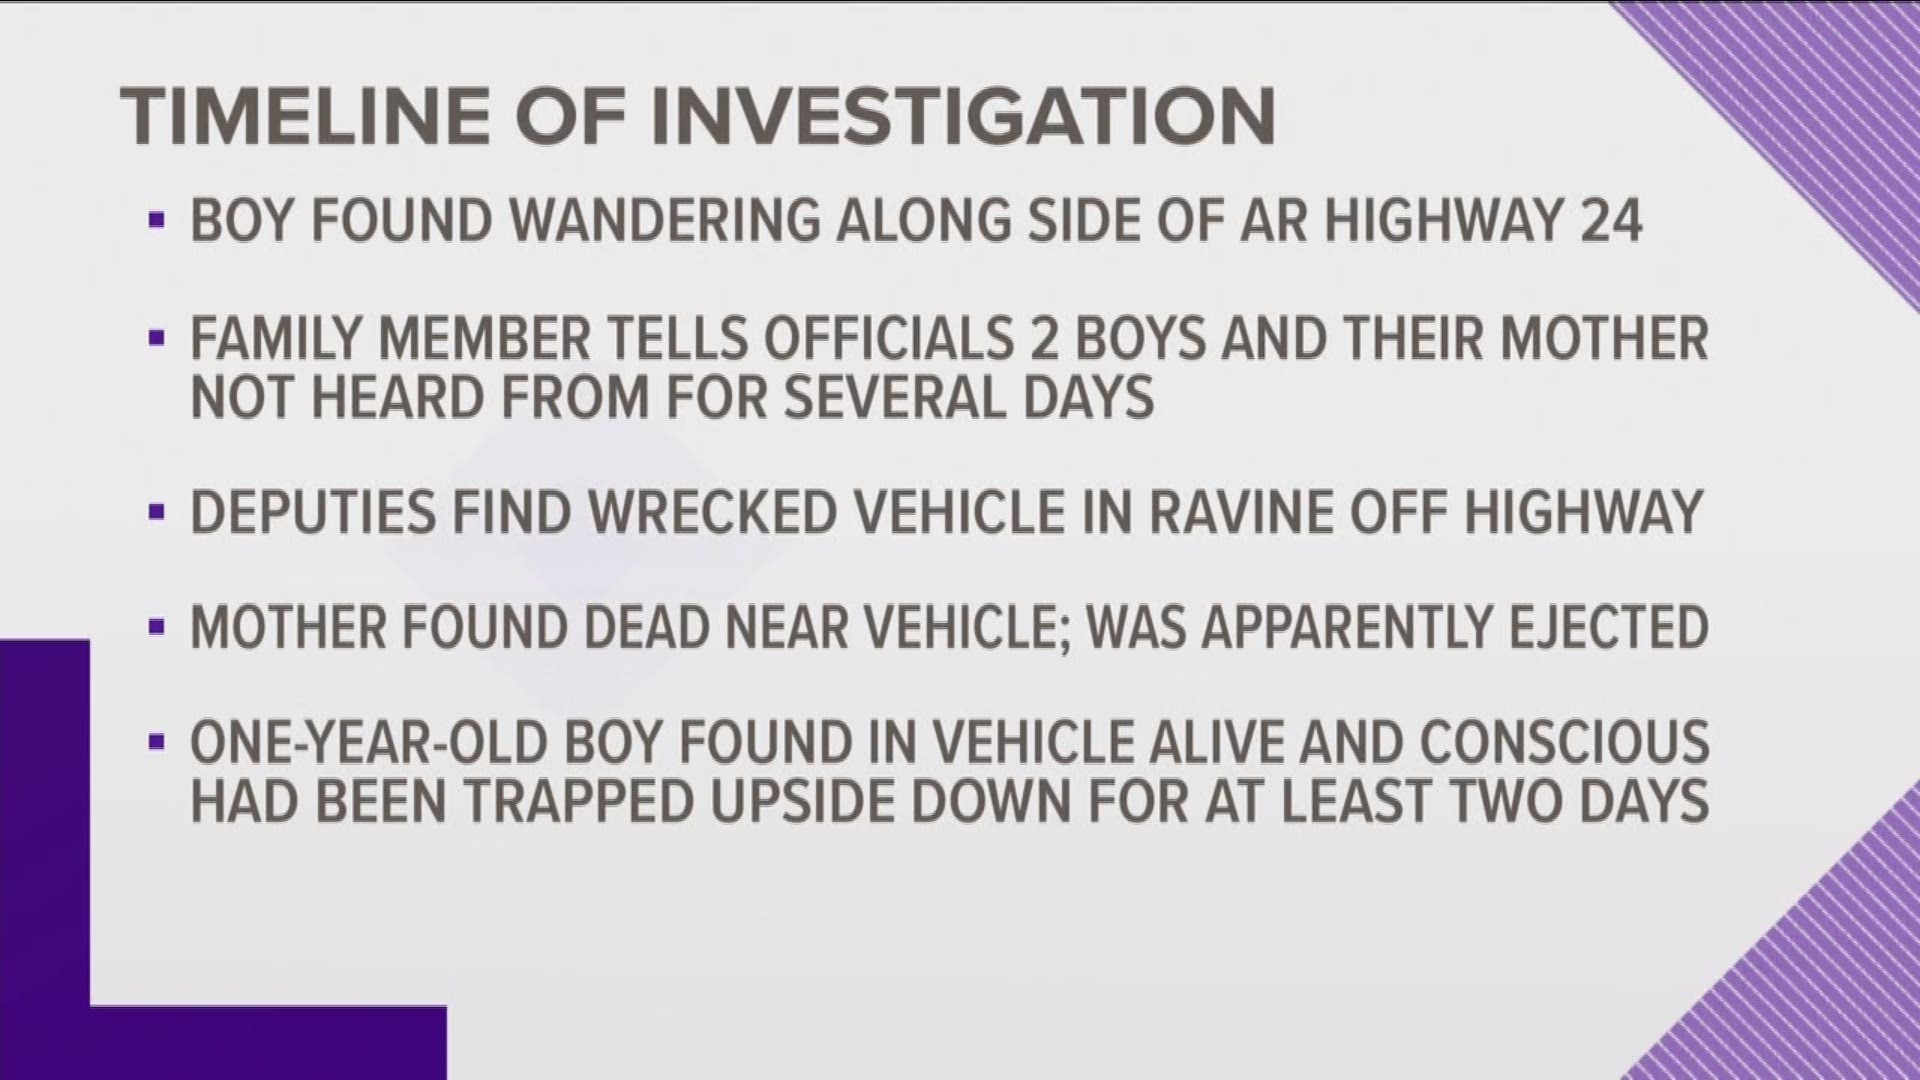 The boy had been involved in a car accident, and near the place he had been found wandering the highway, deputies found a wrecked vehicle in a ravine. 